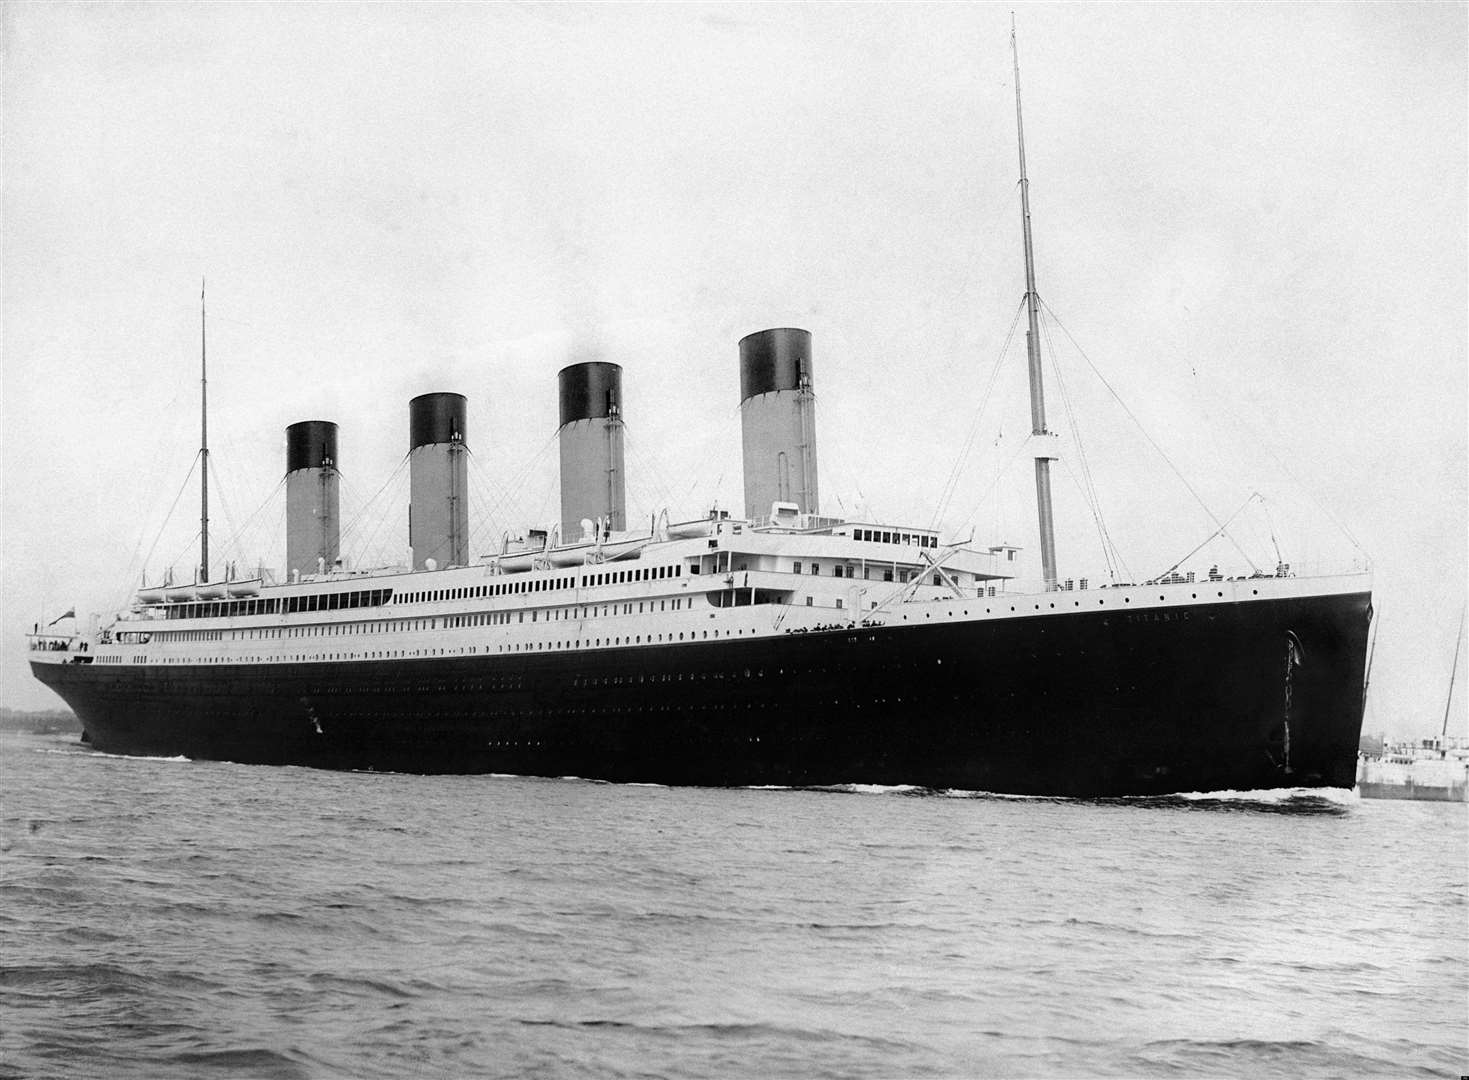 In the book is evidence that the owners of the Titanic, the White Star Line, lied to the official inquiries into the disaster about the reduction of the number of lifeboats